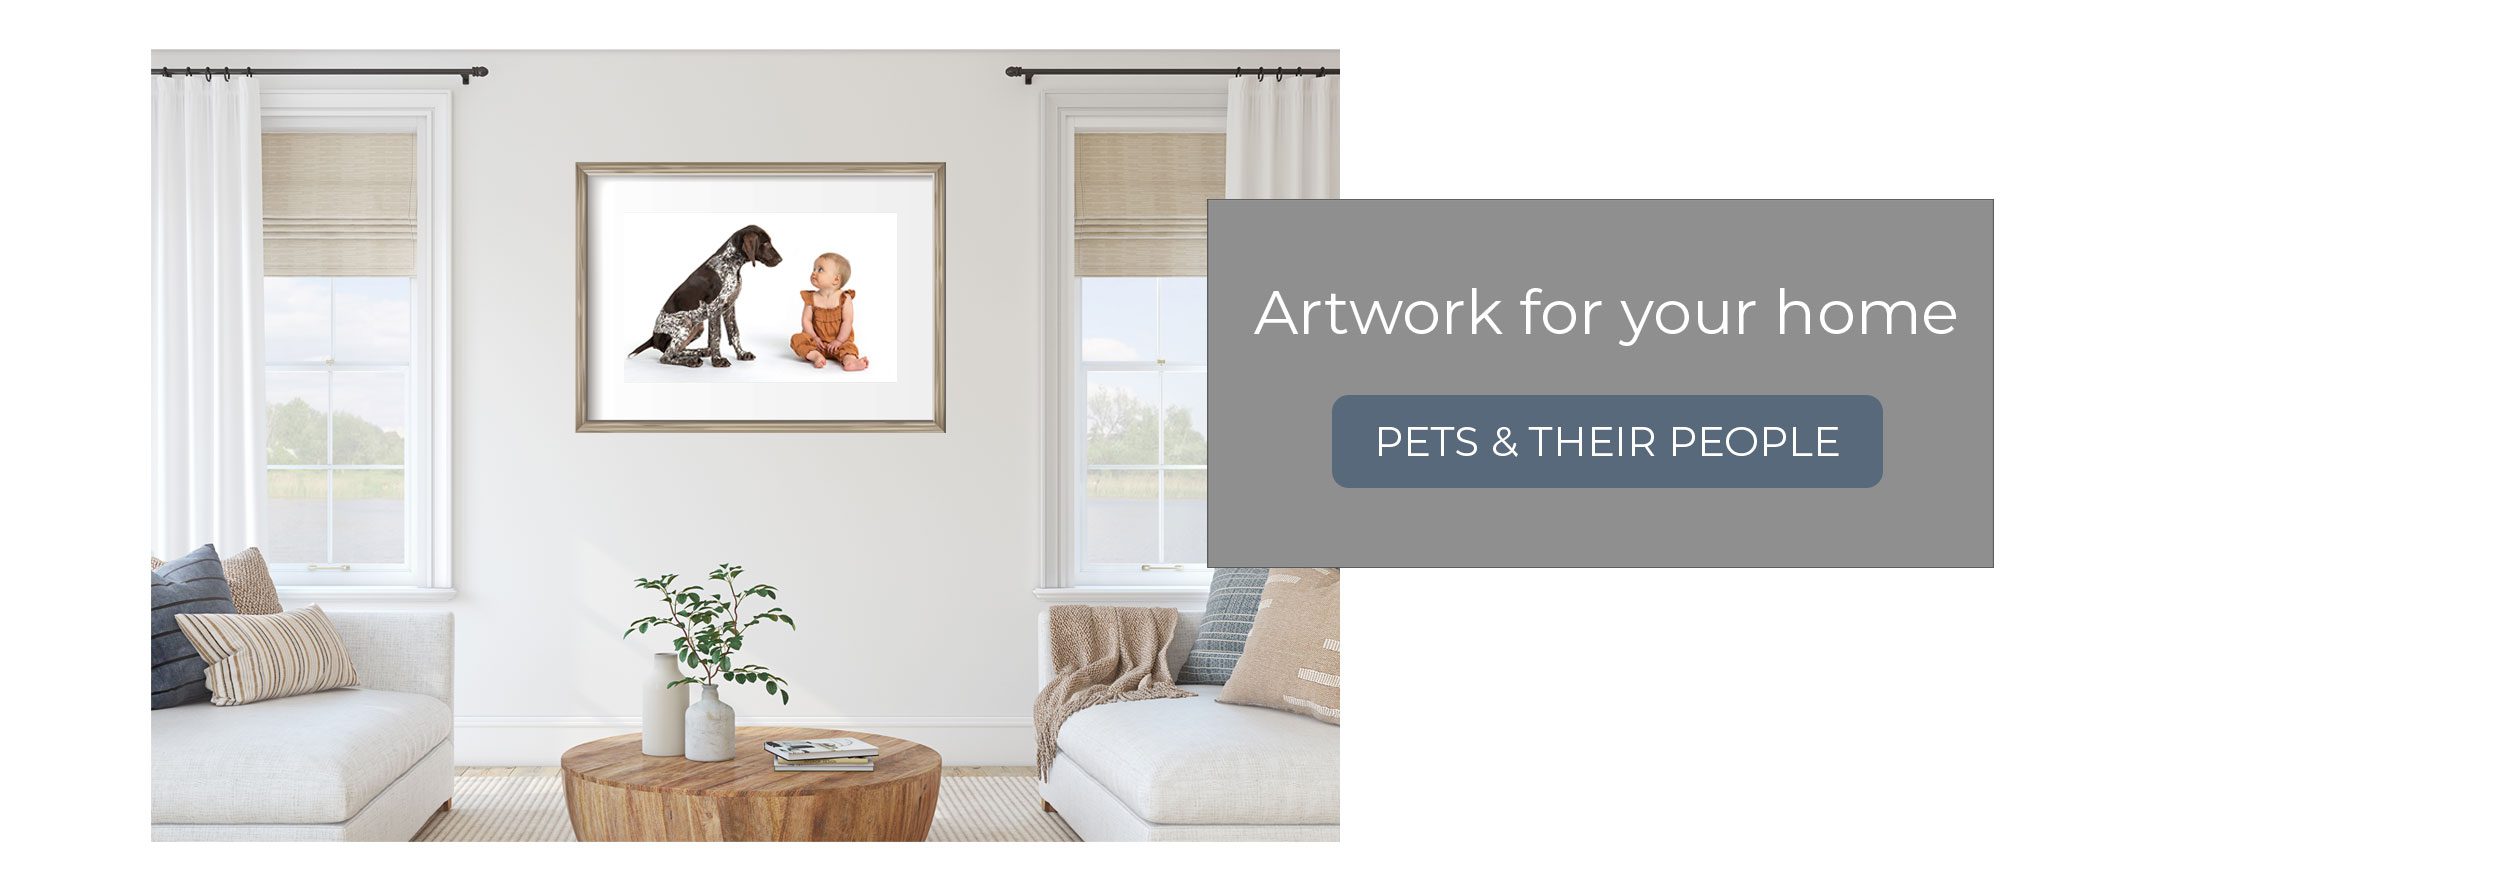 Living room with picture of a dog and baby